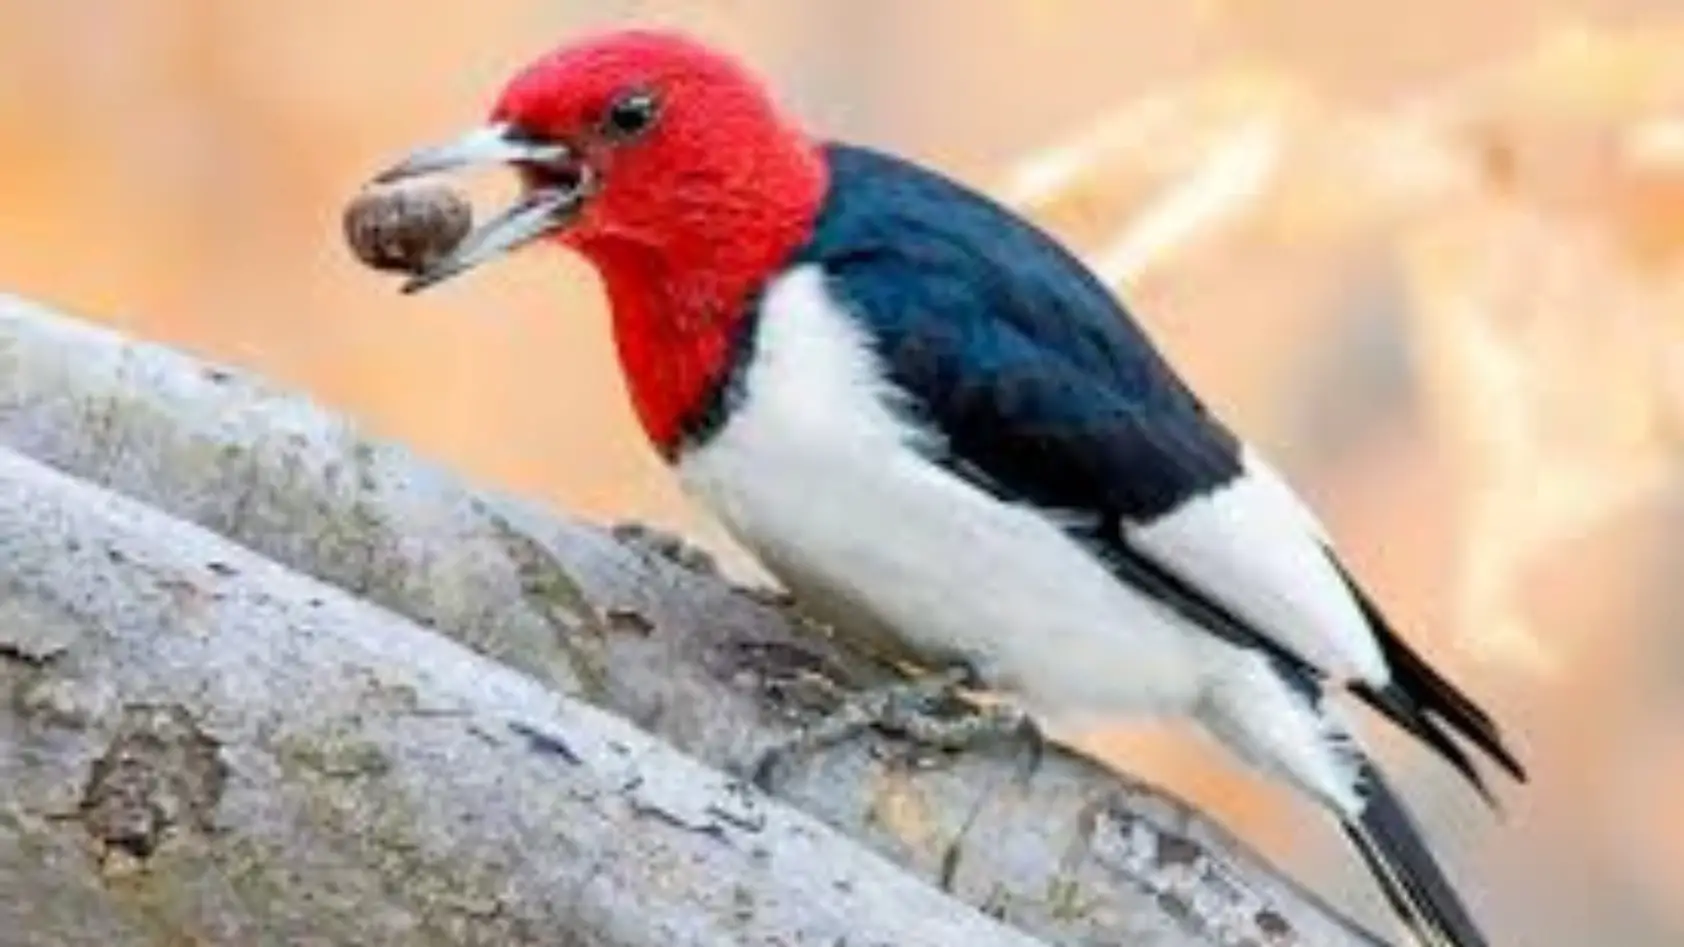 Black And White Bird With Red Head!